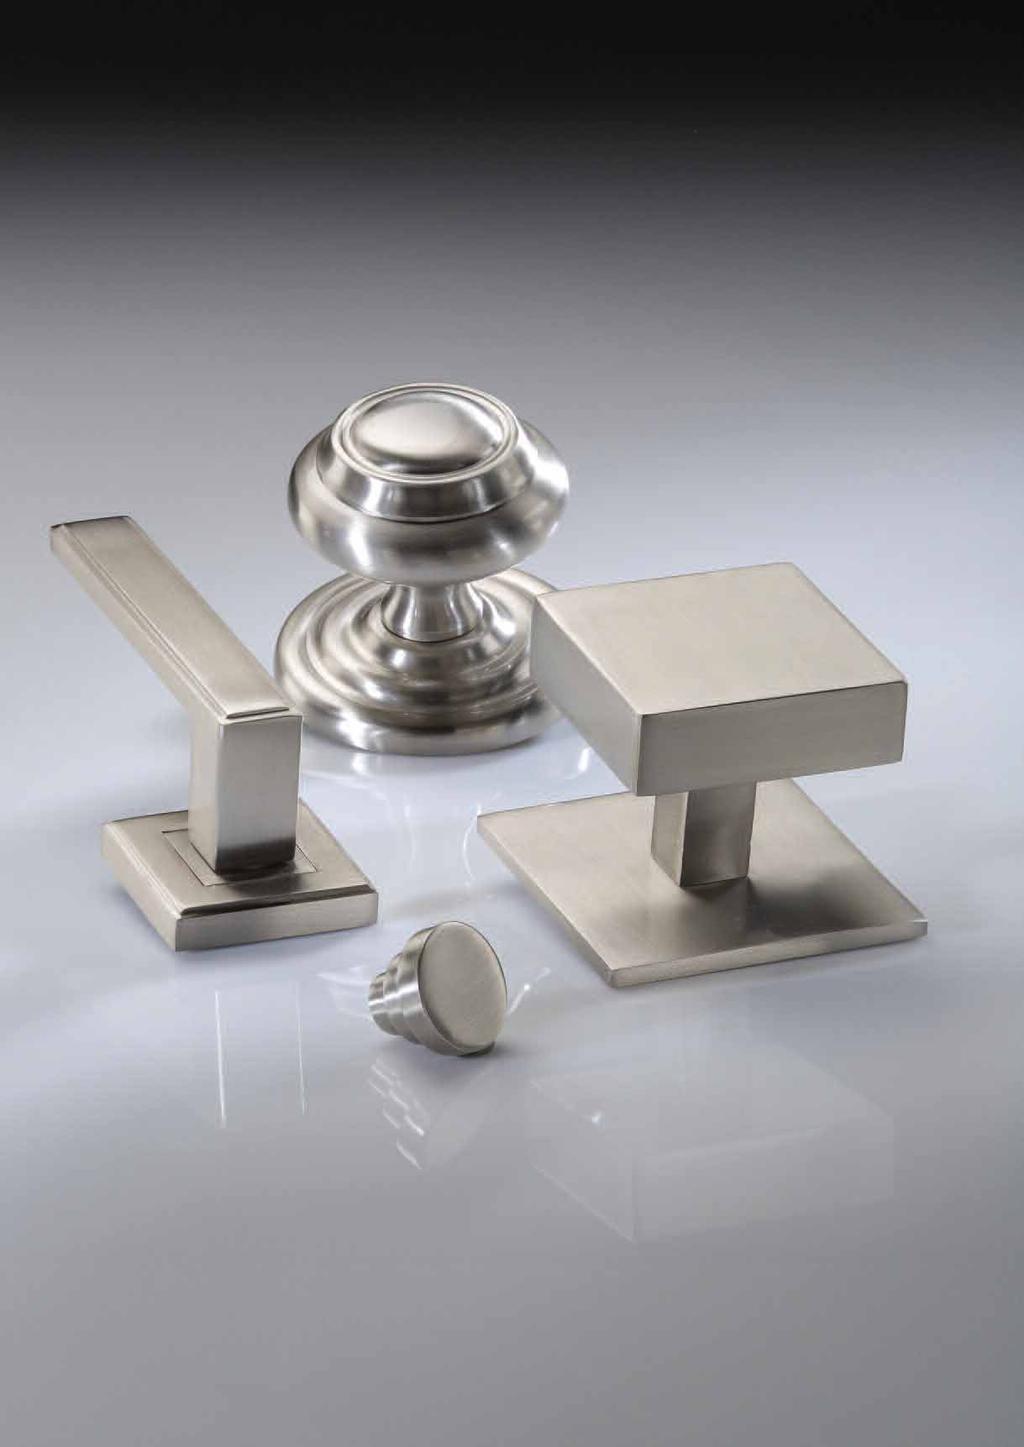 Finish With its honeyed grey tone created by brushed nickel plating on brass, this finish closely matches